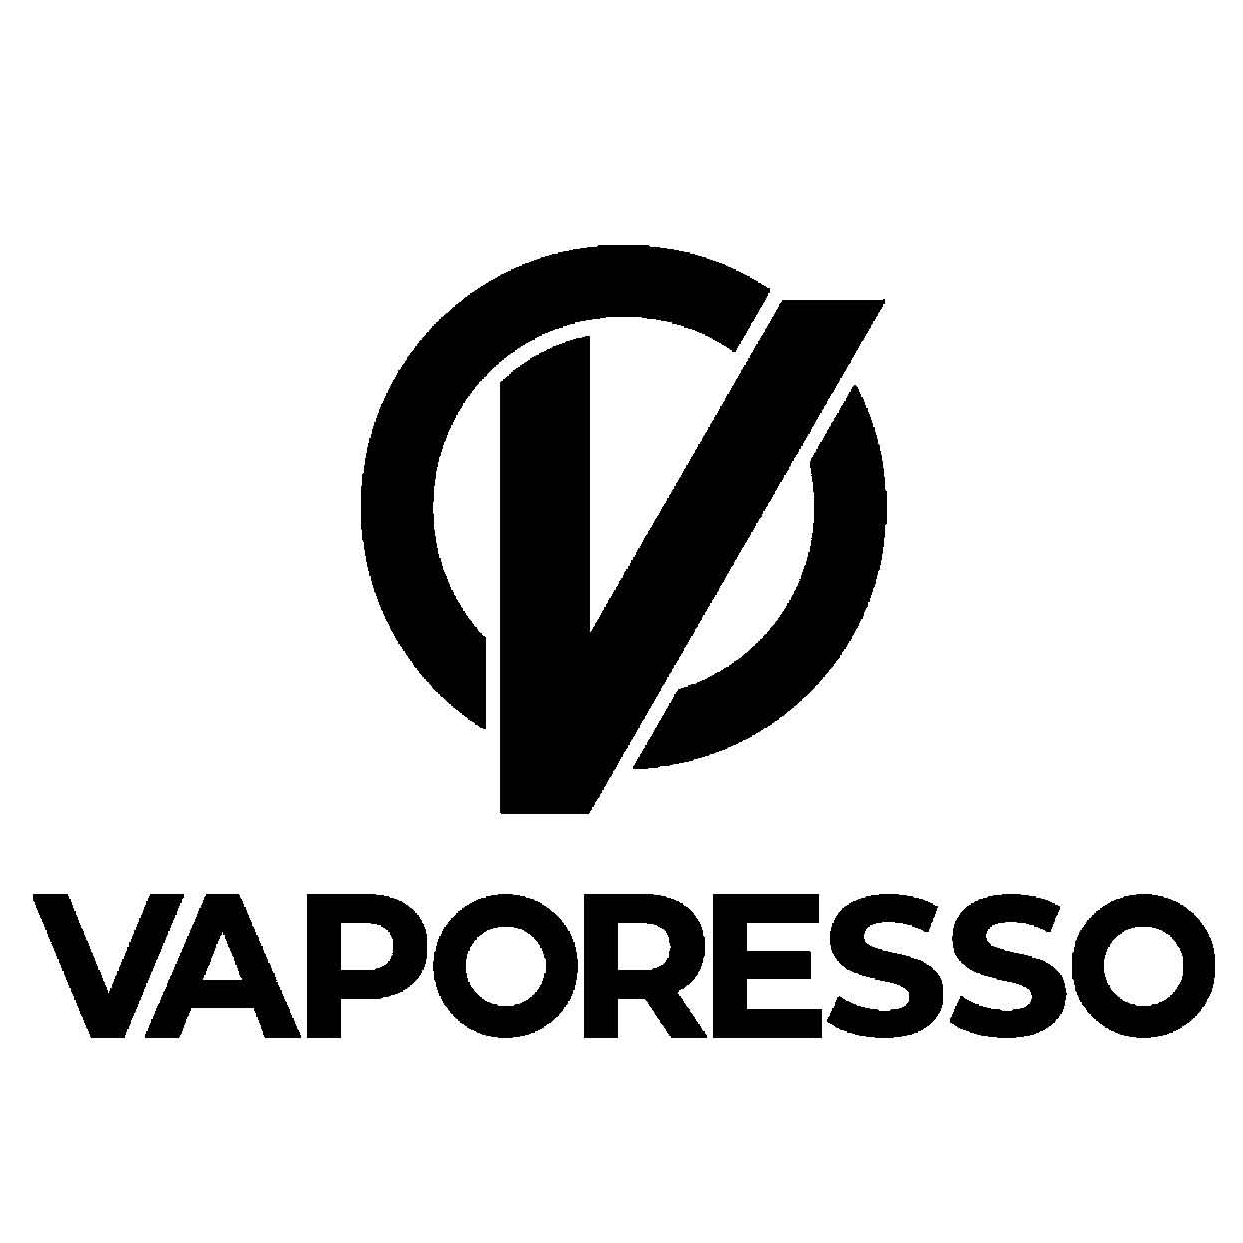 Vaporesso Hardware available online and in store at The Vape Store Canada.